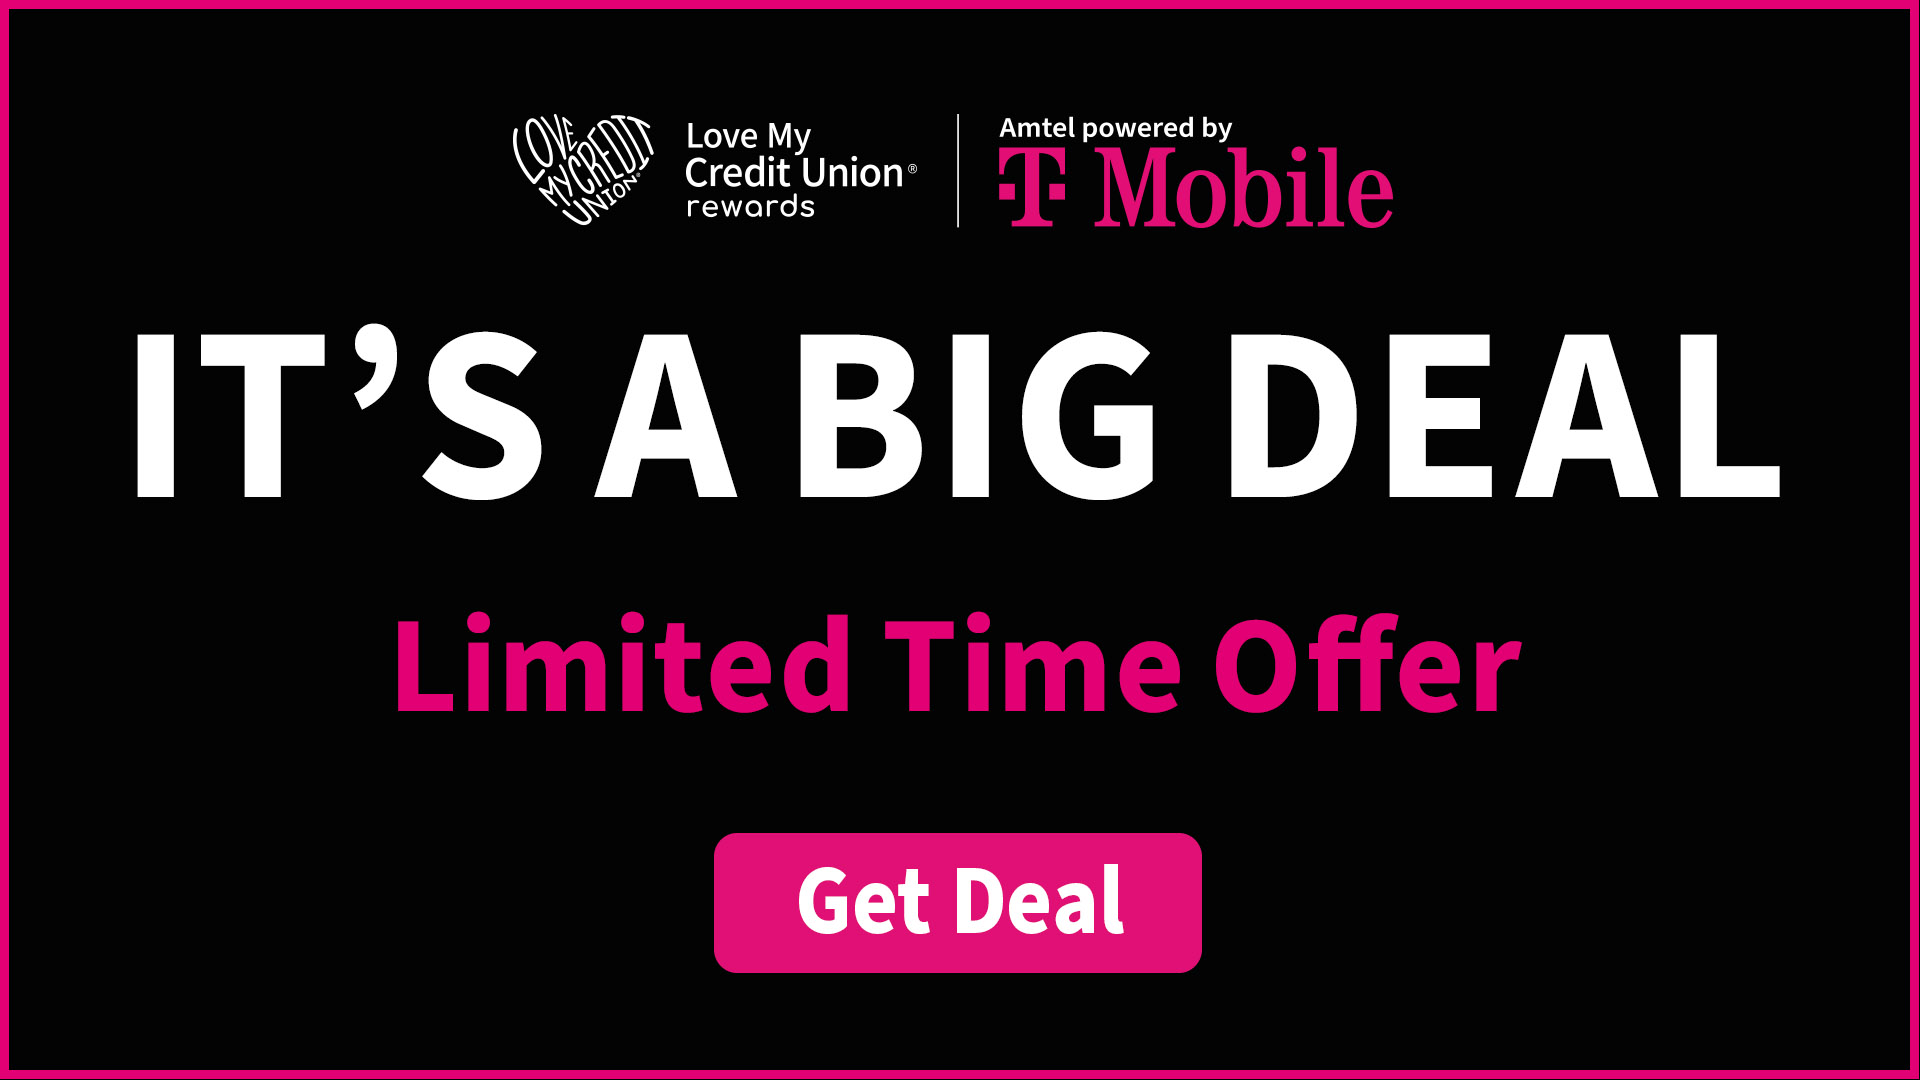 Limited time T-Mobile deal through Love My Credit Union Rewards